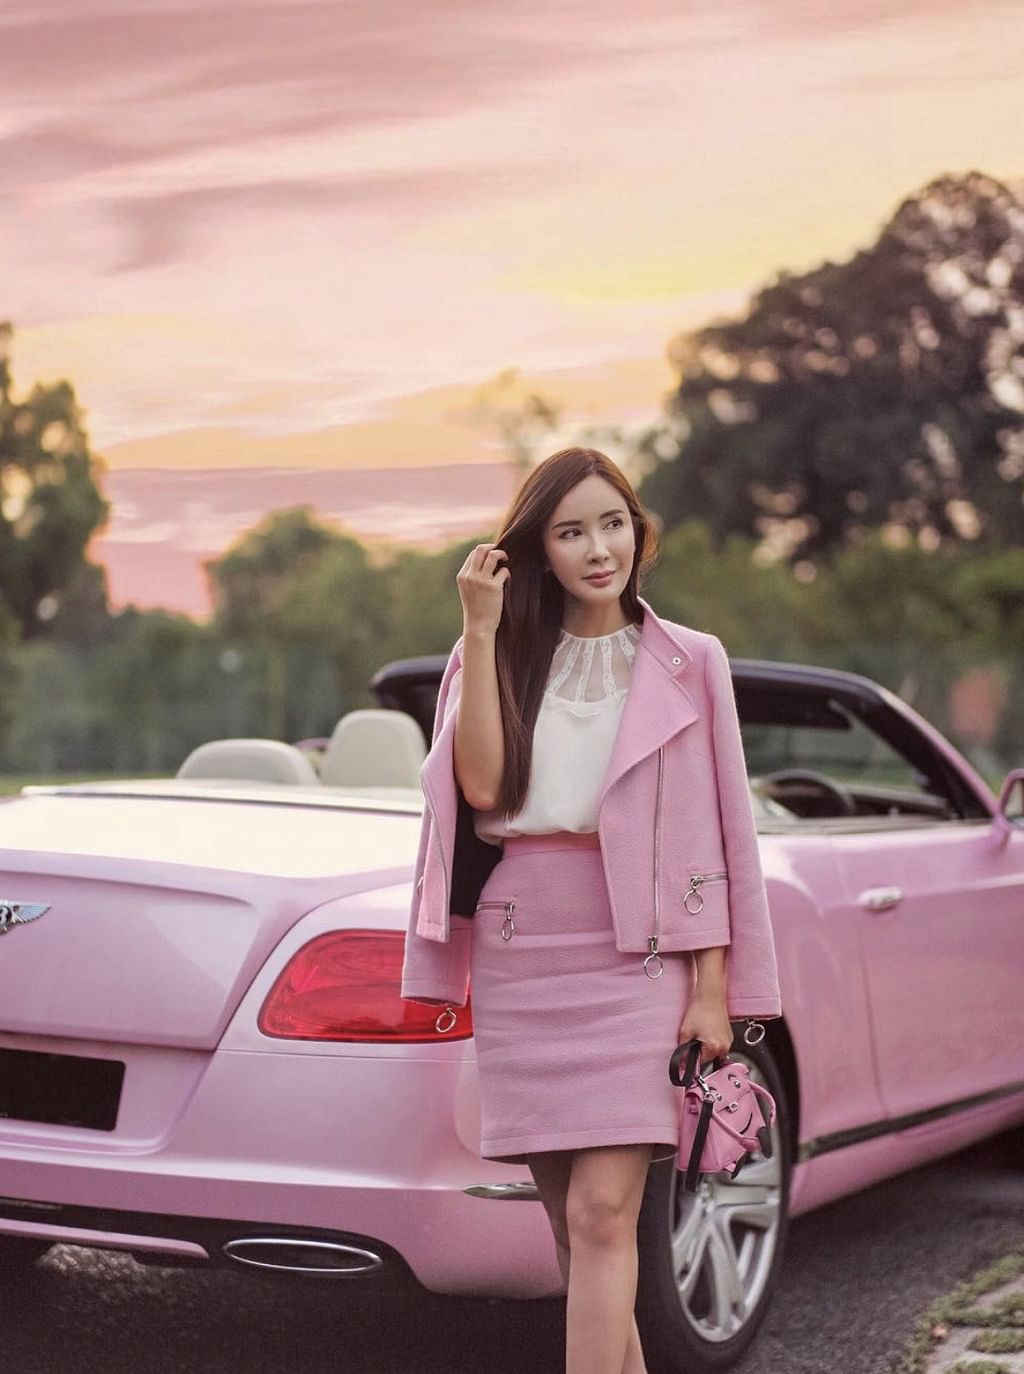 All the pink luxury handbags by social elite Jamie Chua owns, from